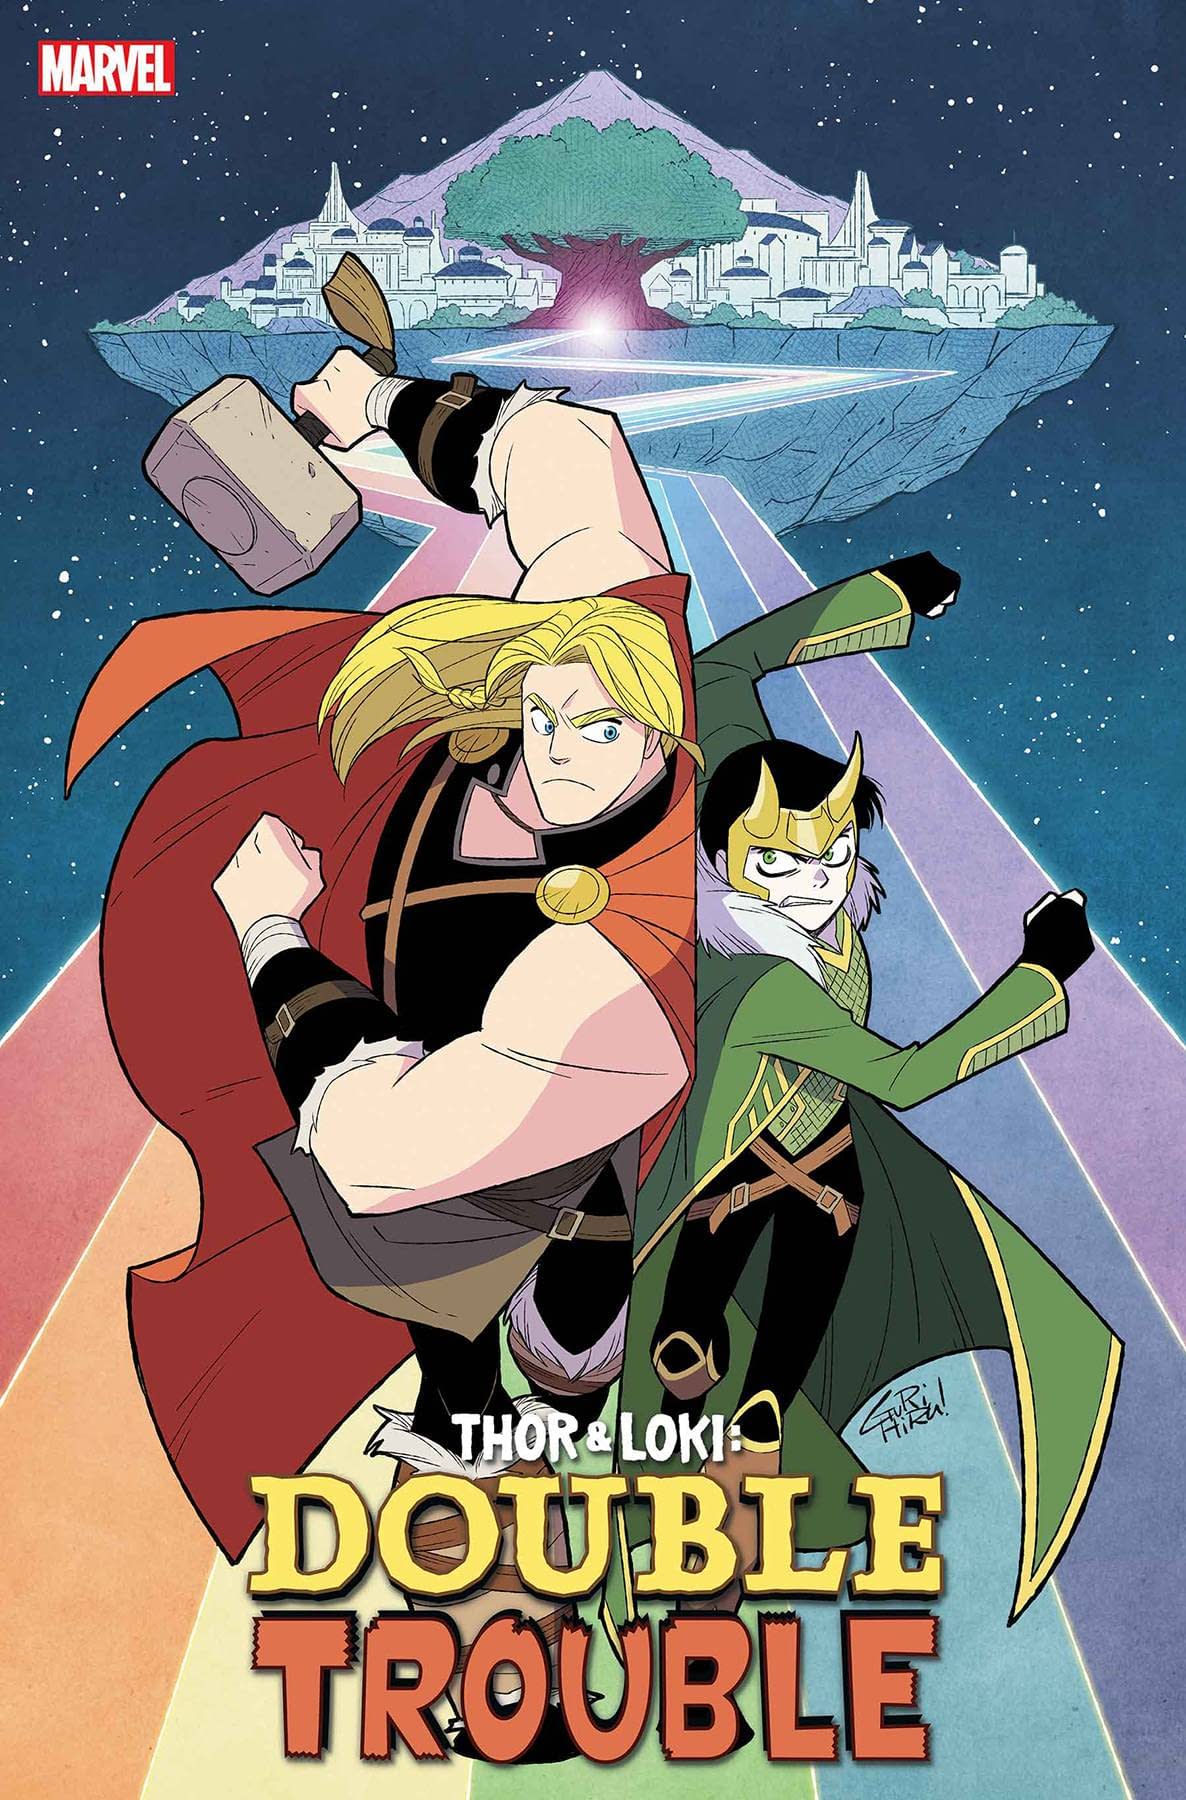 THOR AND LOKI DOUBLE TROUBLE #1 (OF 4)